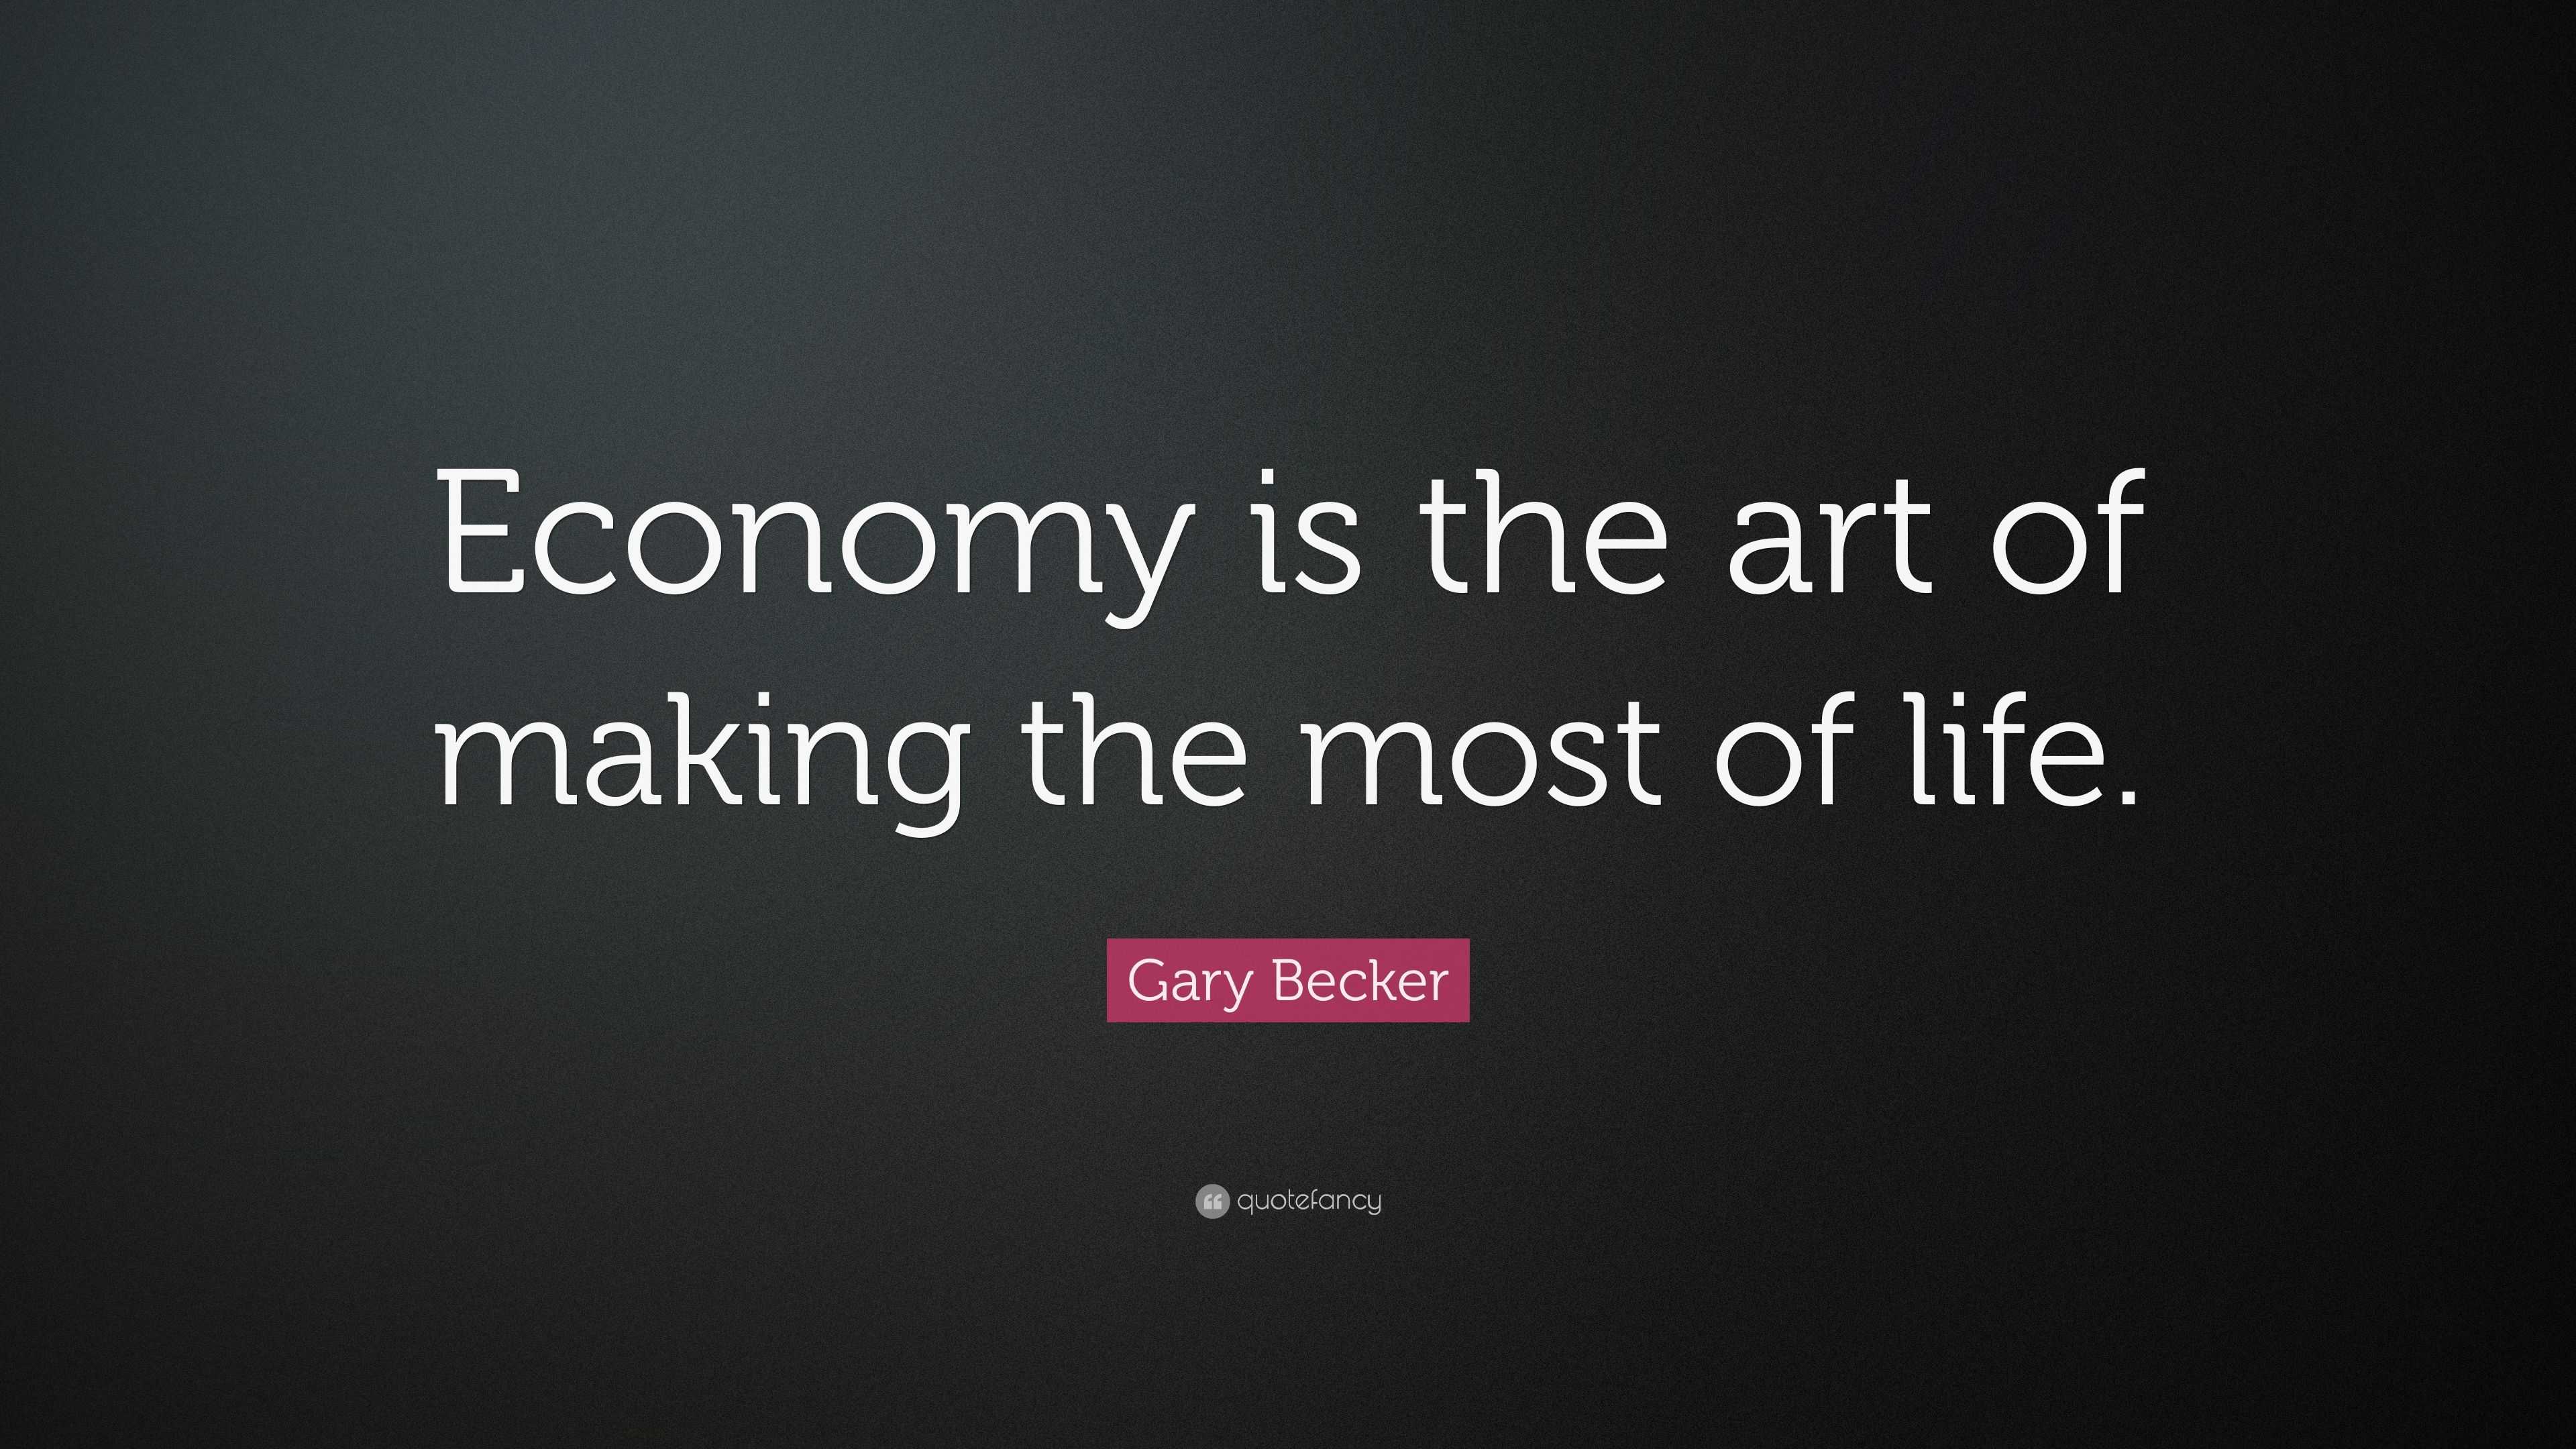 Gary Becker Quote “Economy is the art of making the most of life.”